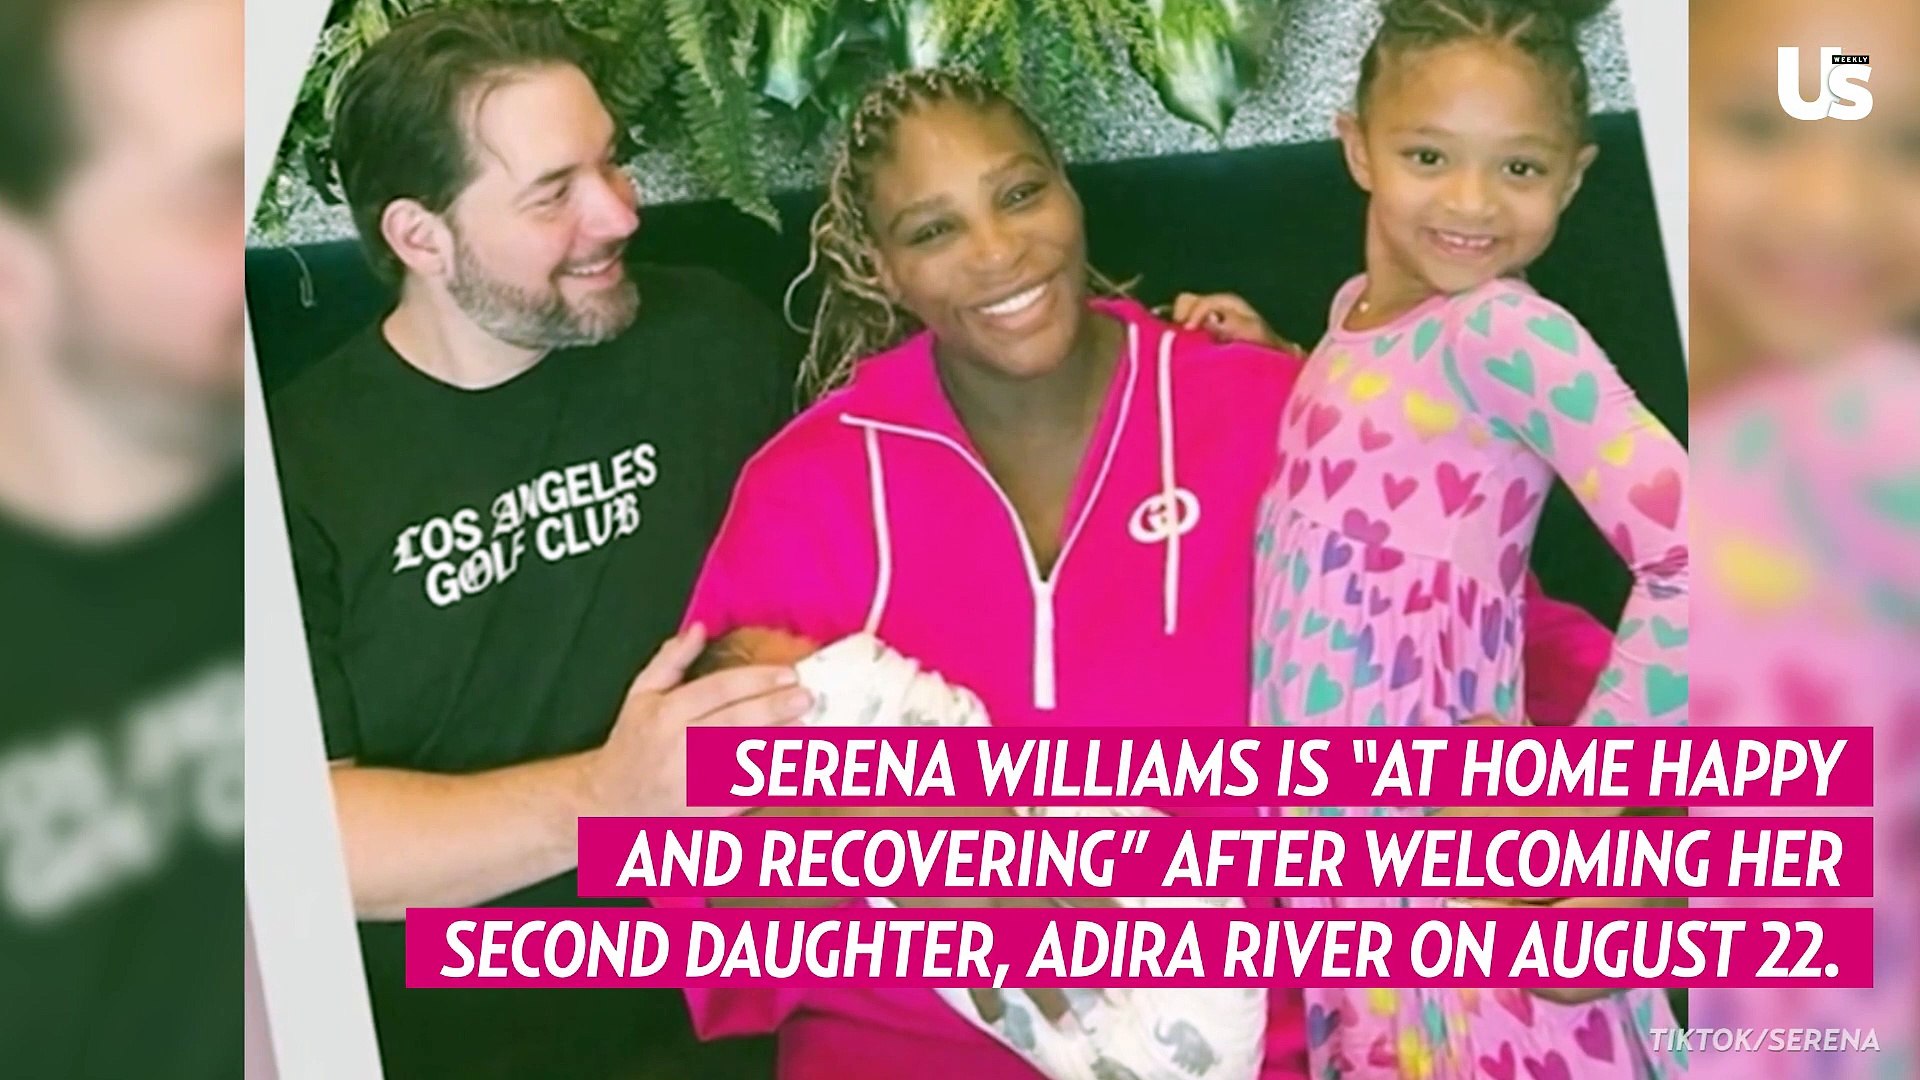 Alexis Ohanian & Serena Williams House Tour 2020  Inside Their Beautiful  Beverly Hills Home Mansion 